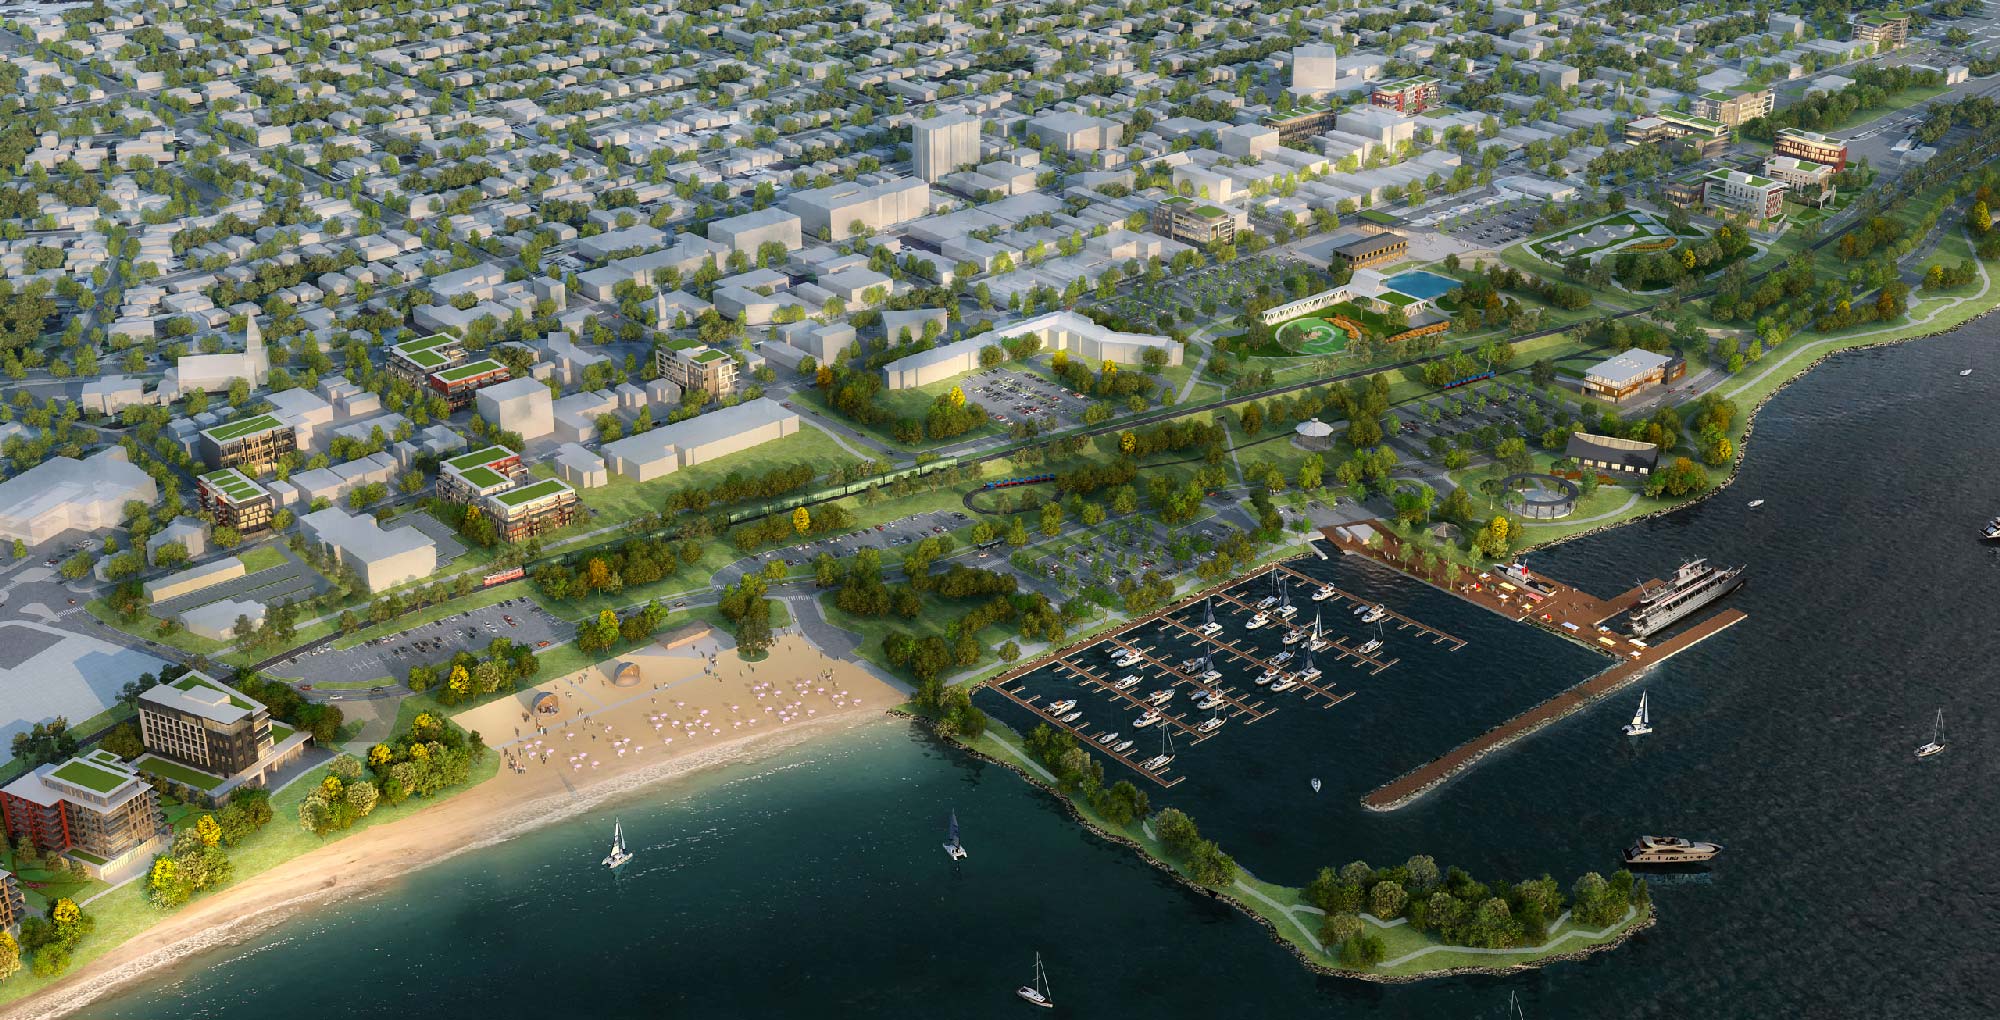 an artist's rendering of a waterfront area in a city.